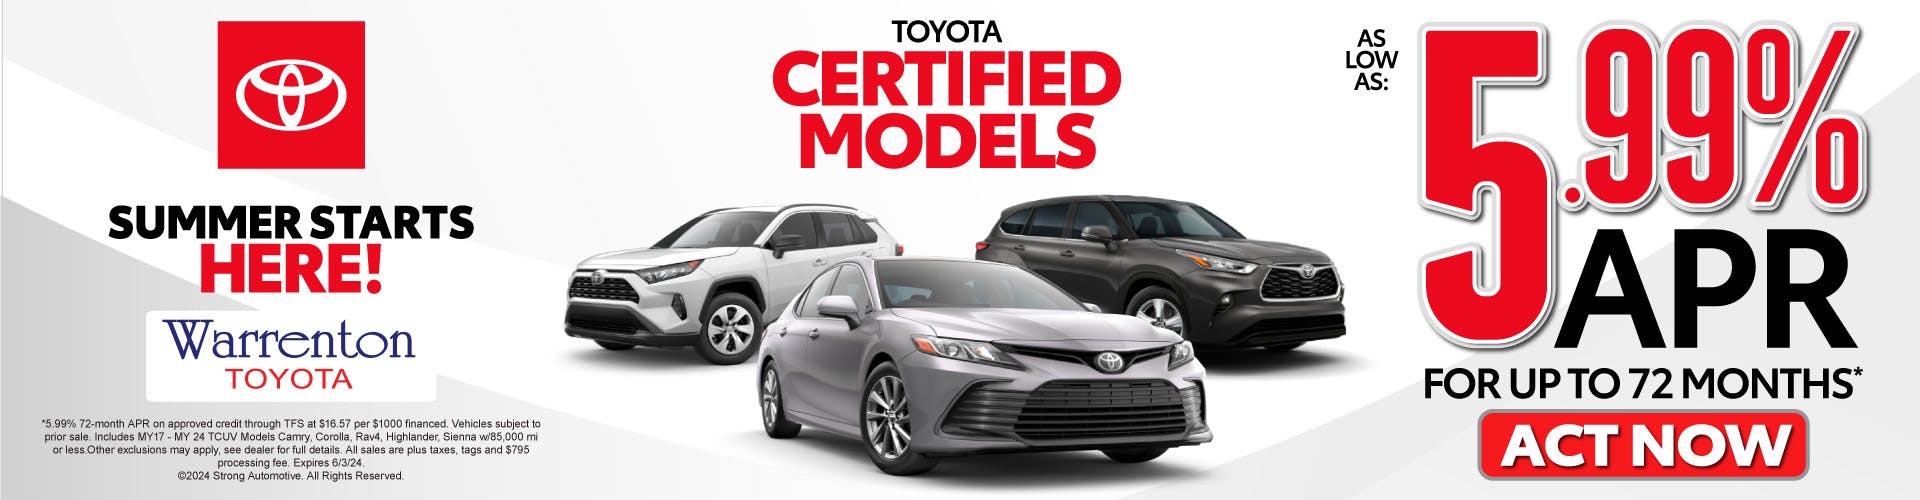 Toyota Certified Models – As Low as 5.99% APR for up to 72 months* – Act Now